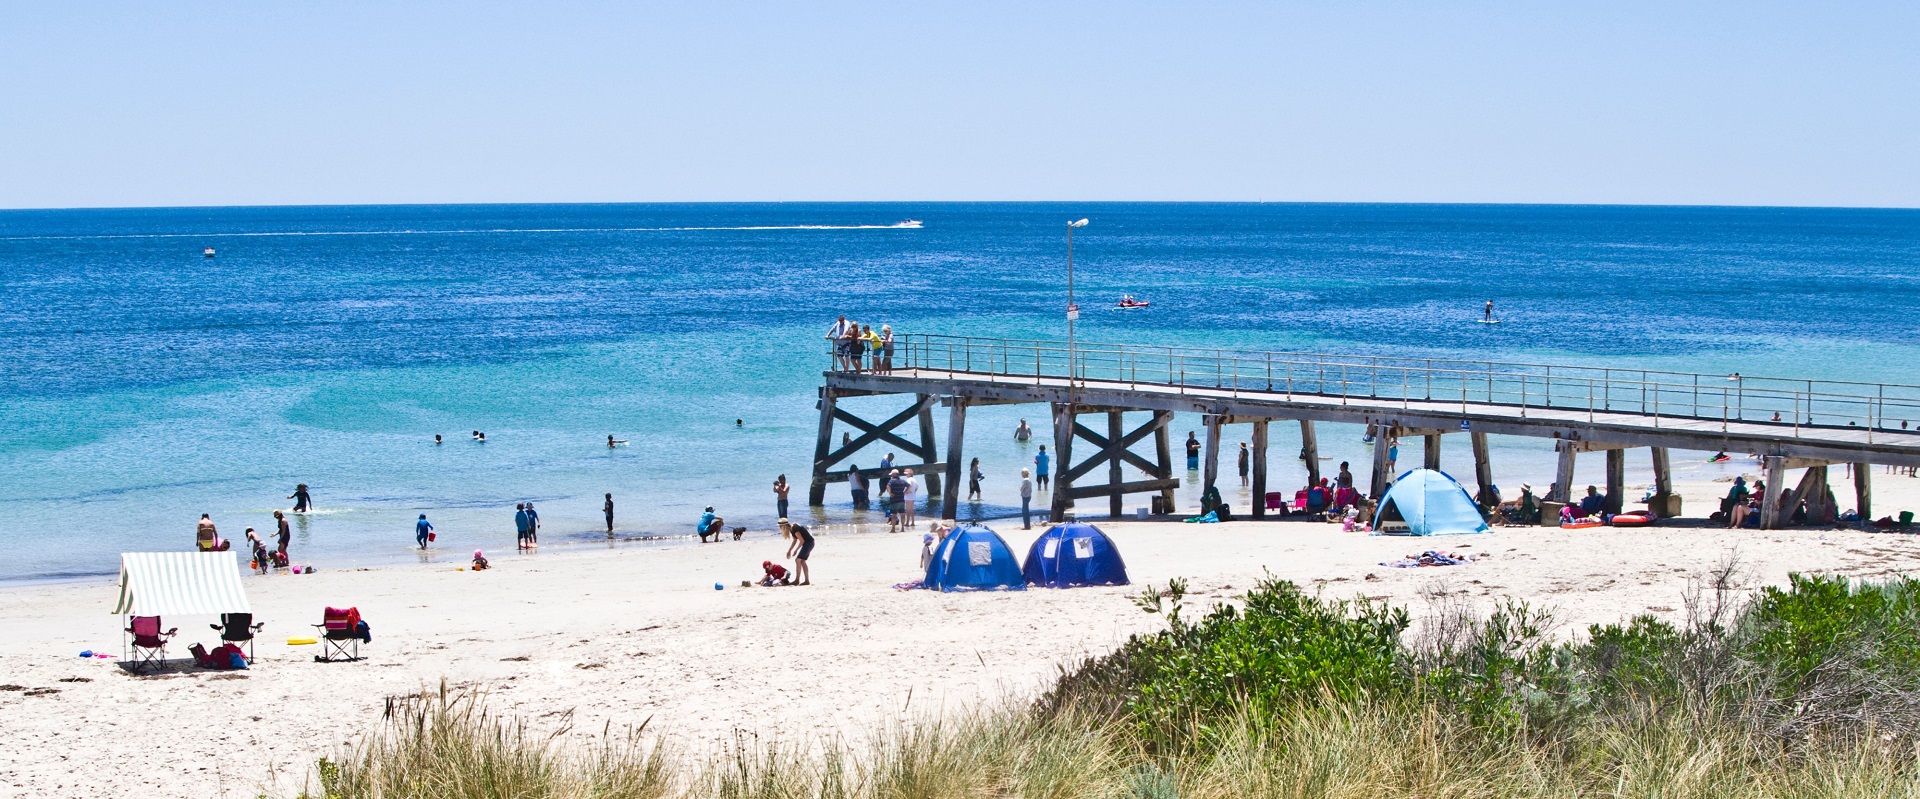 In Normanville, there’s a year-round off-leash area north of the jetty for your pooch to make some new friends on holiday.